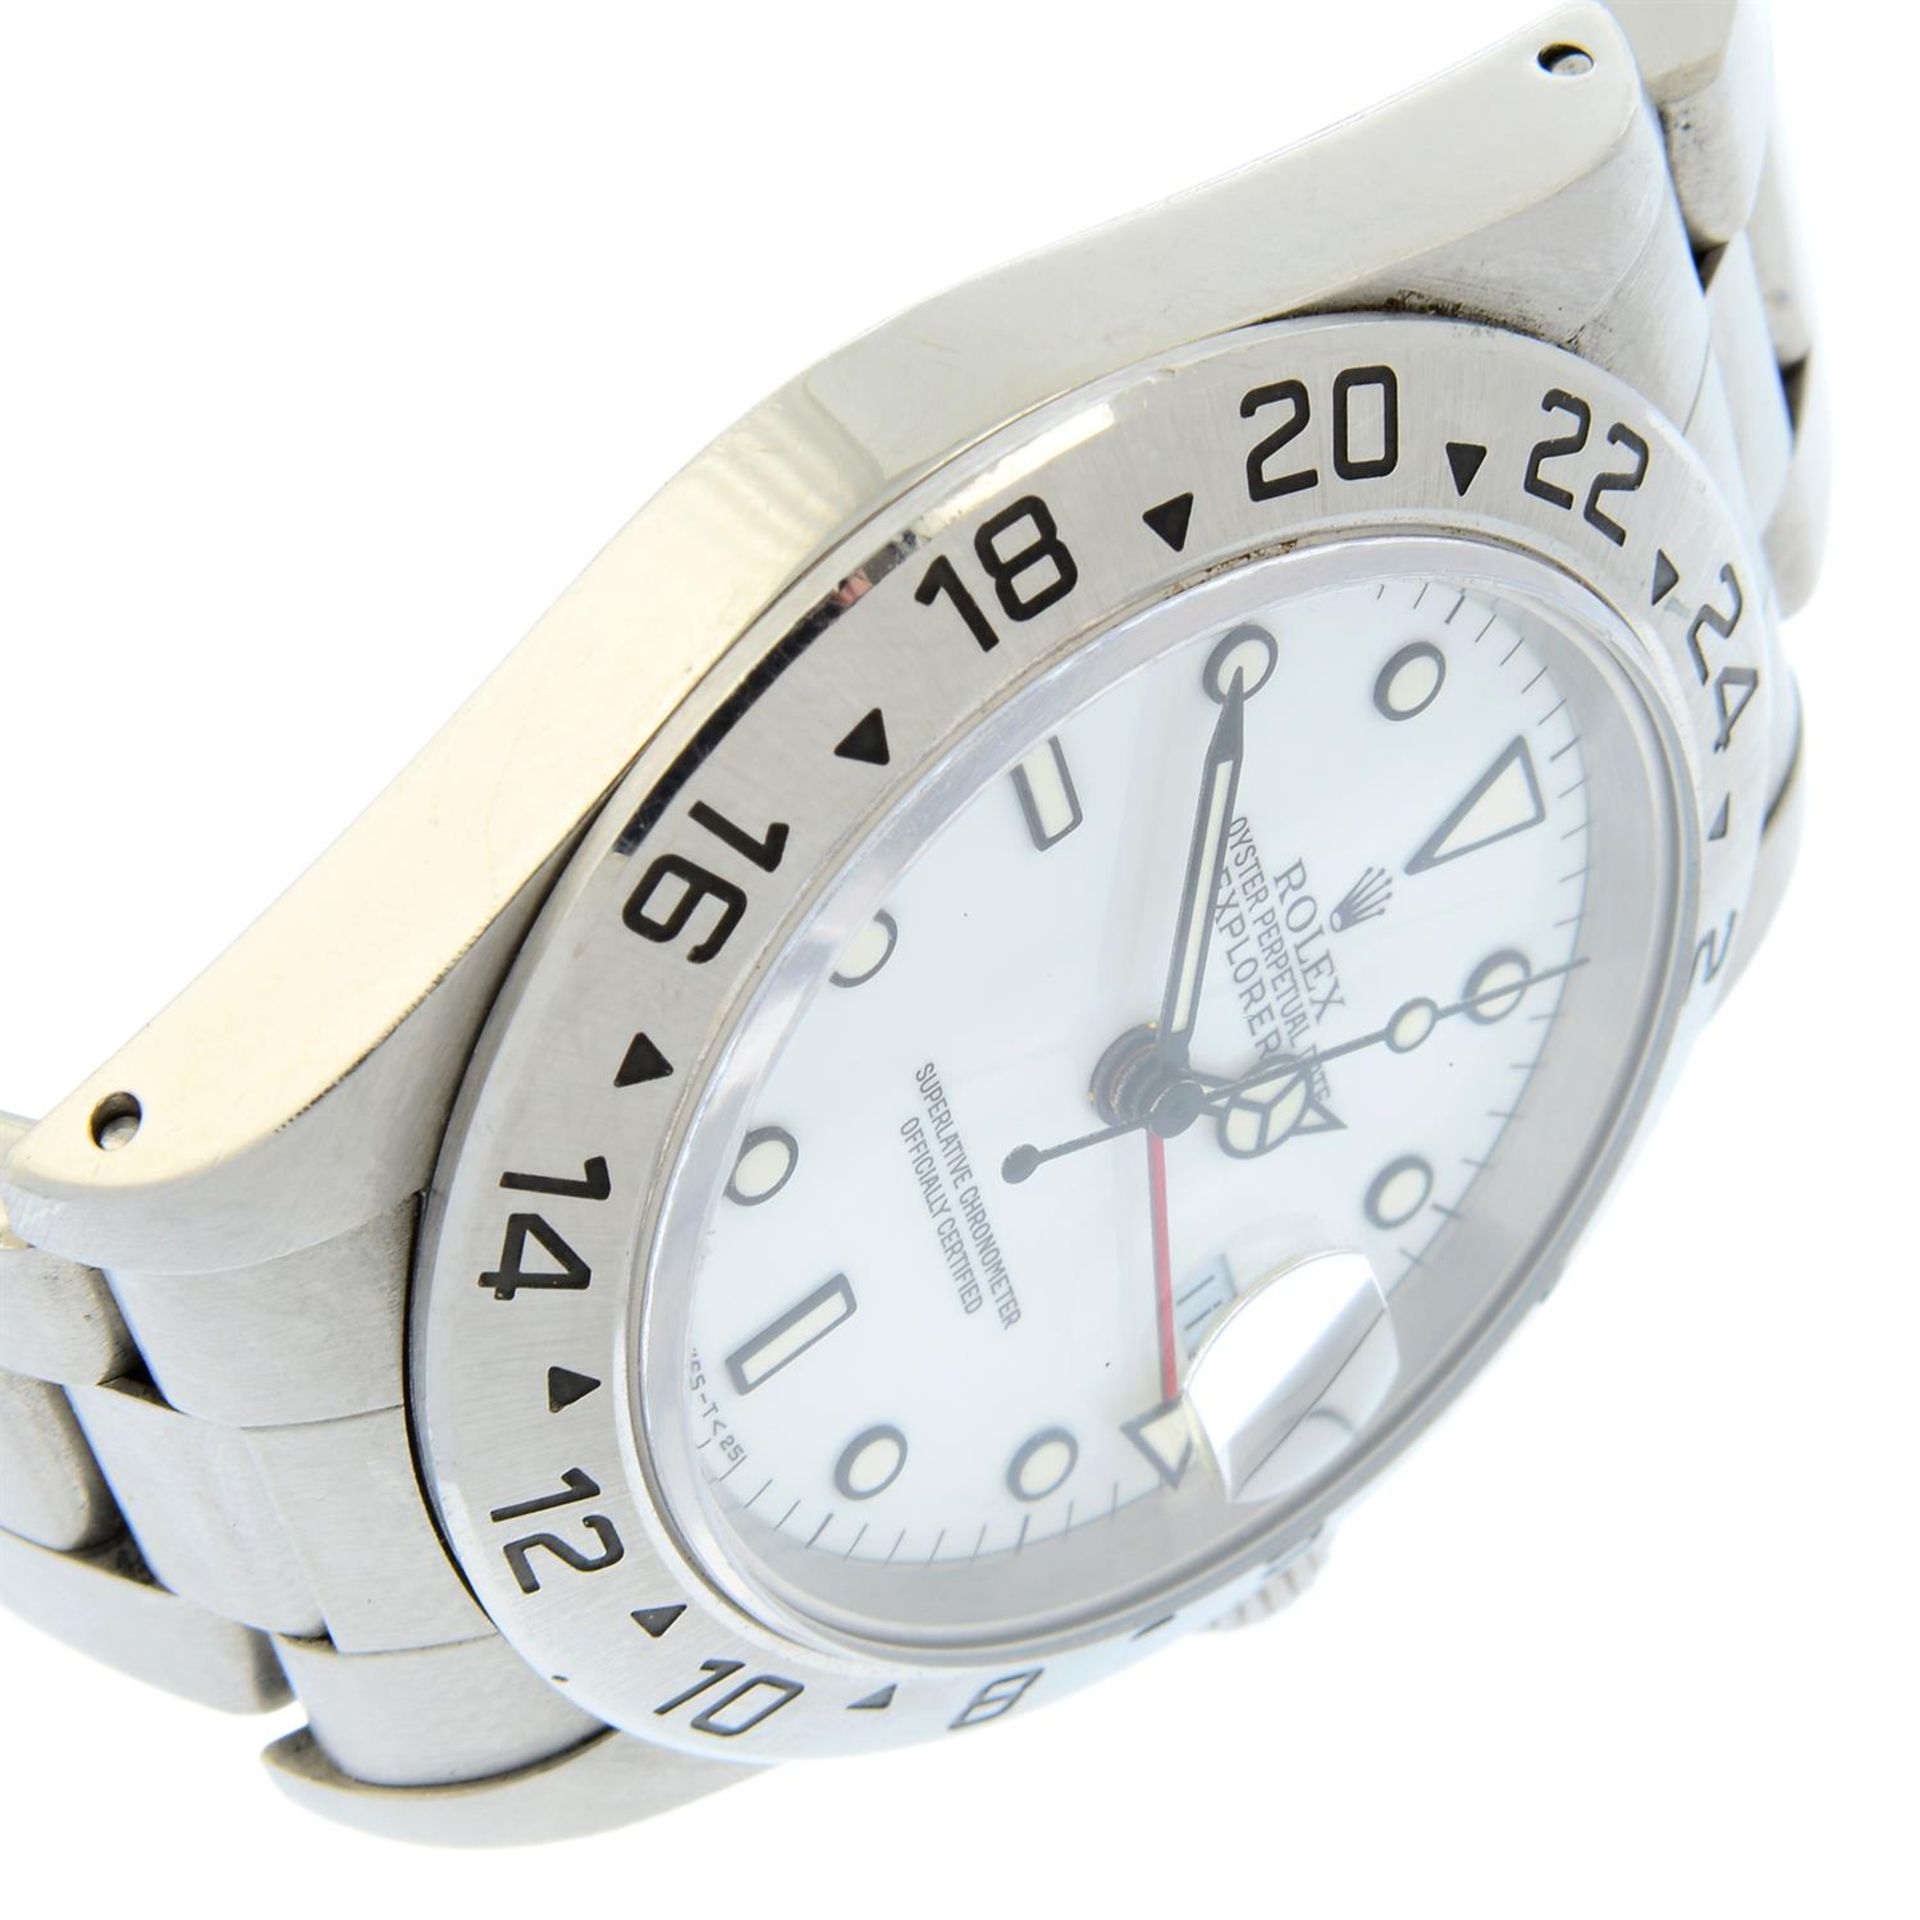 ROLEX - a stainless steel Oyster Perpetual Date Explorer II bracelet watch, 39mm. - Image 4 of 7